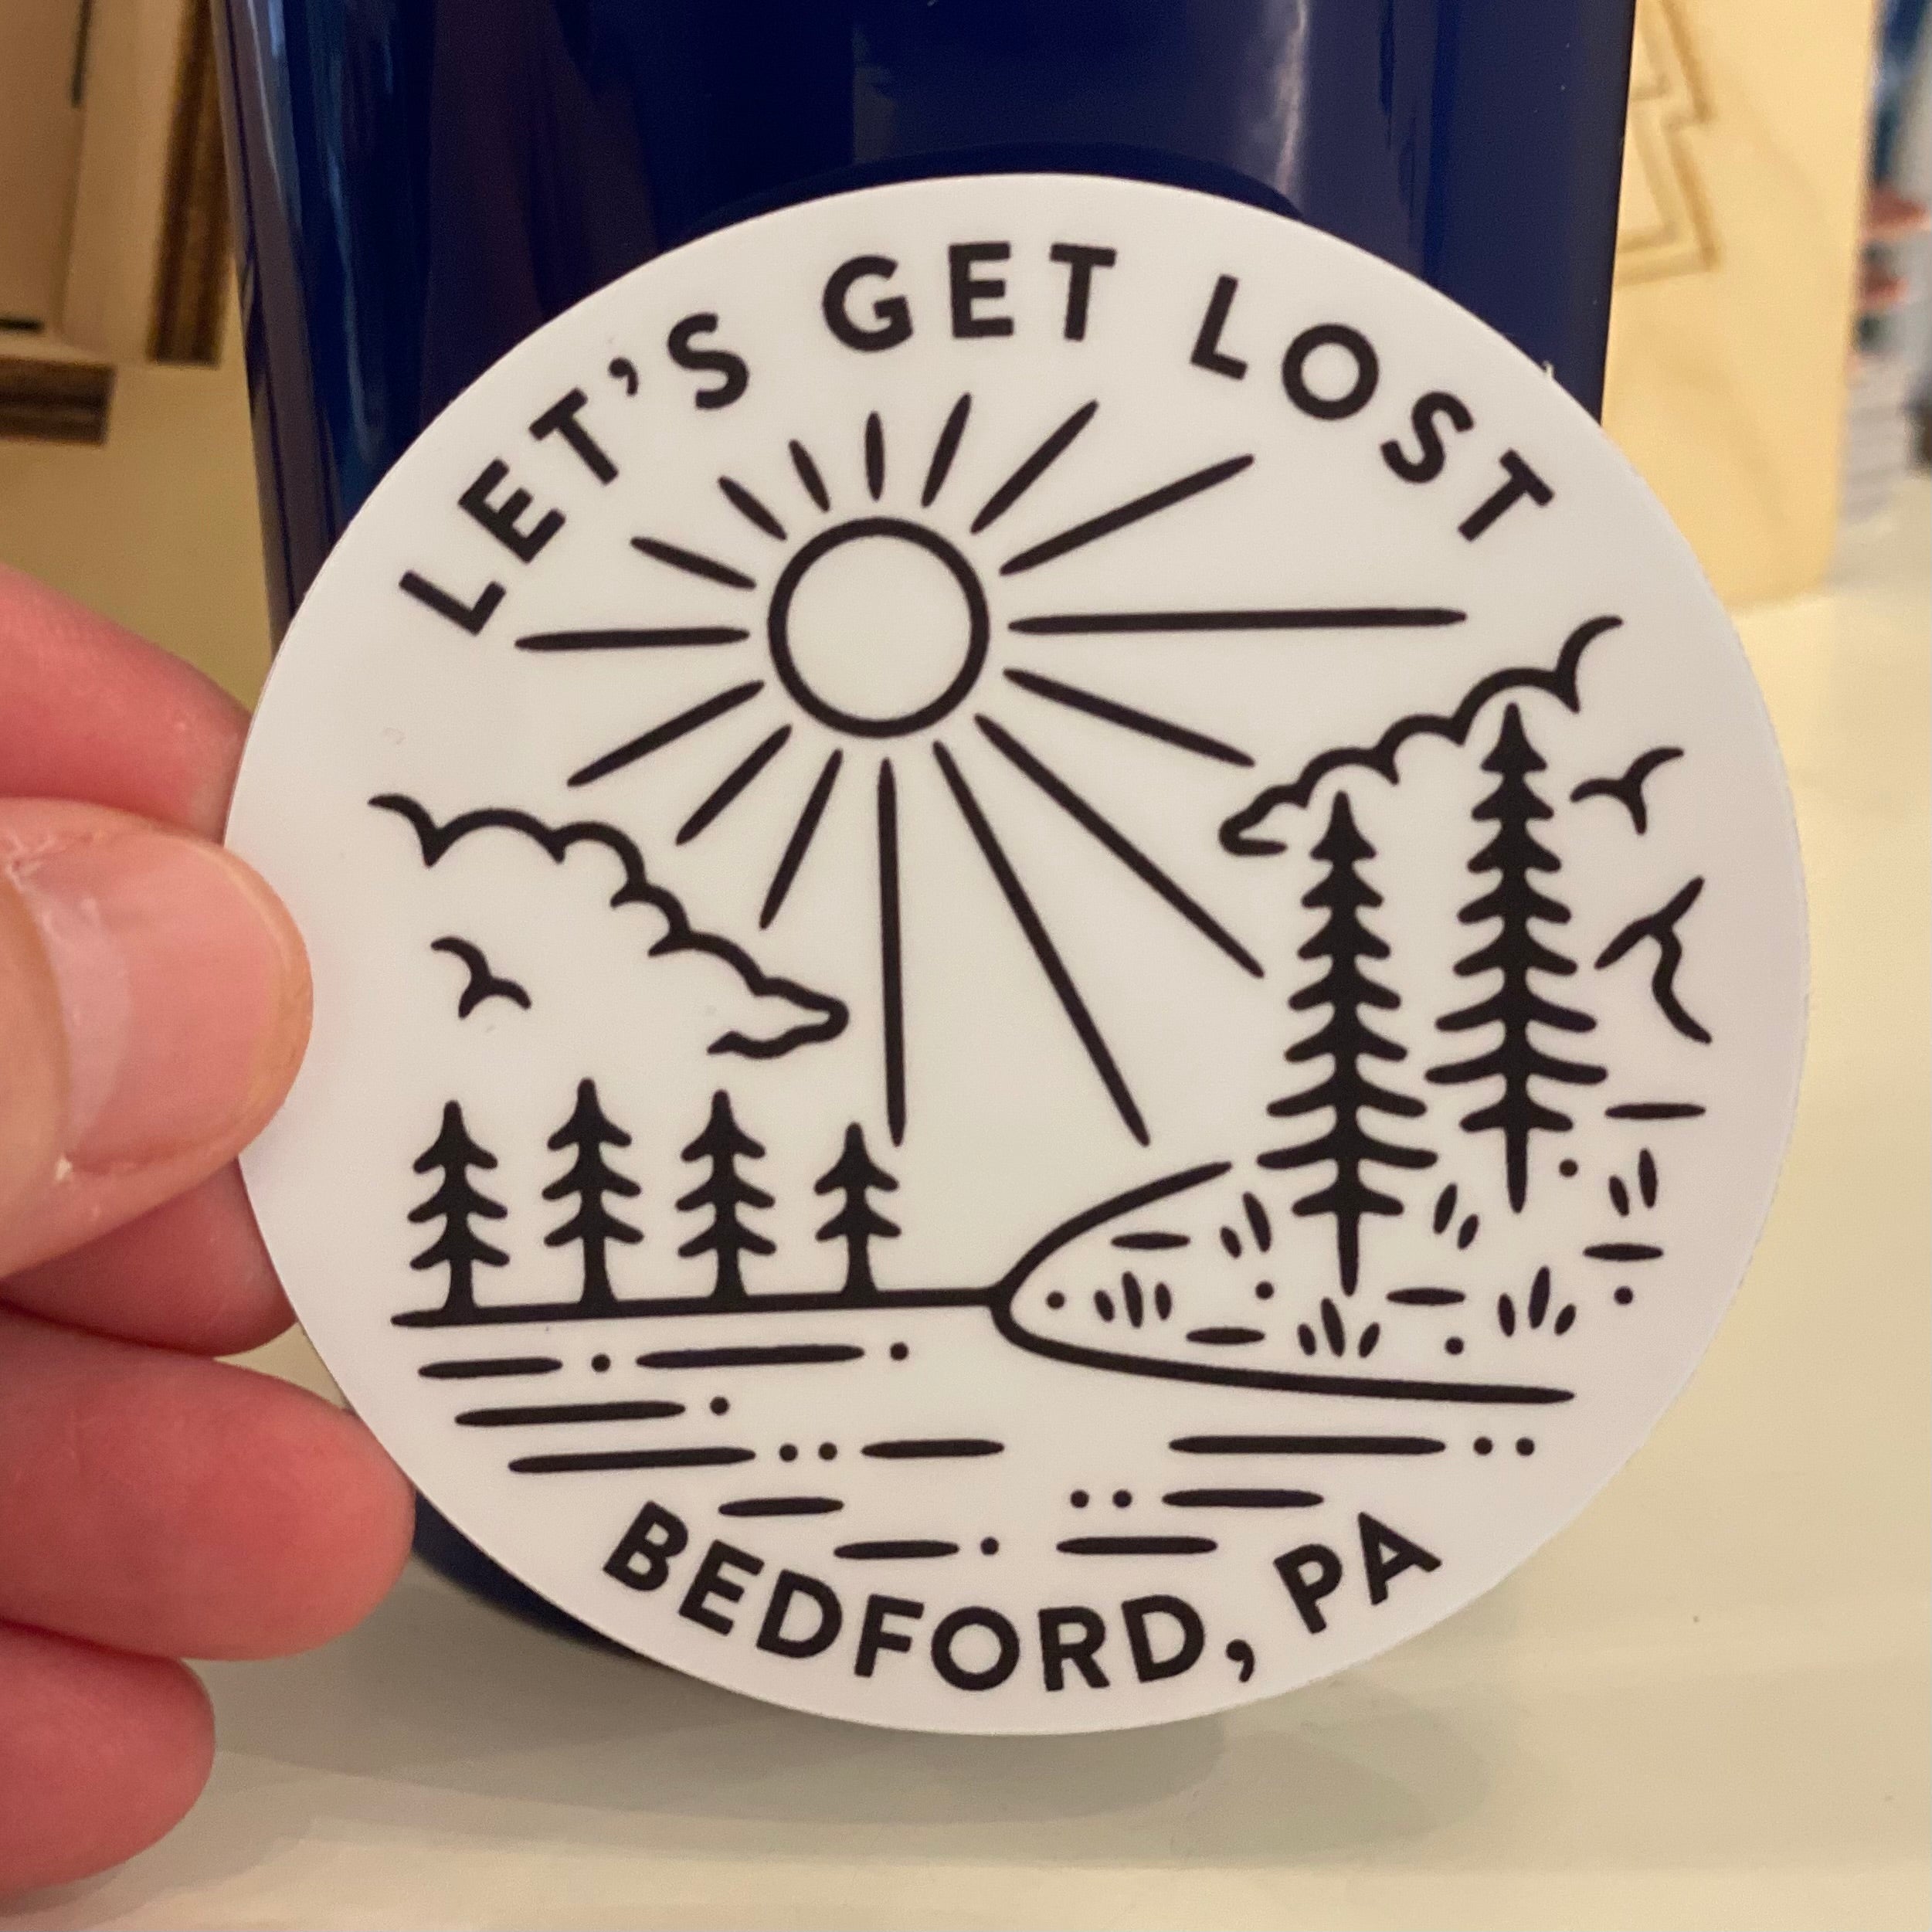 "Let's Get Lost" Bedford, PA Sticker